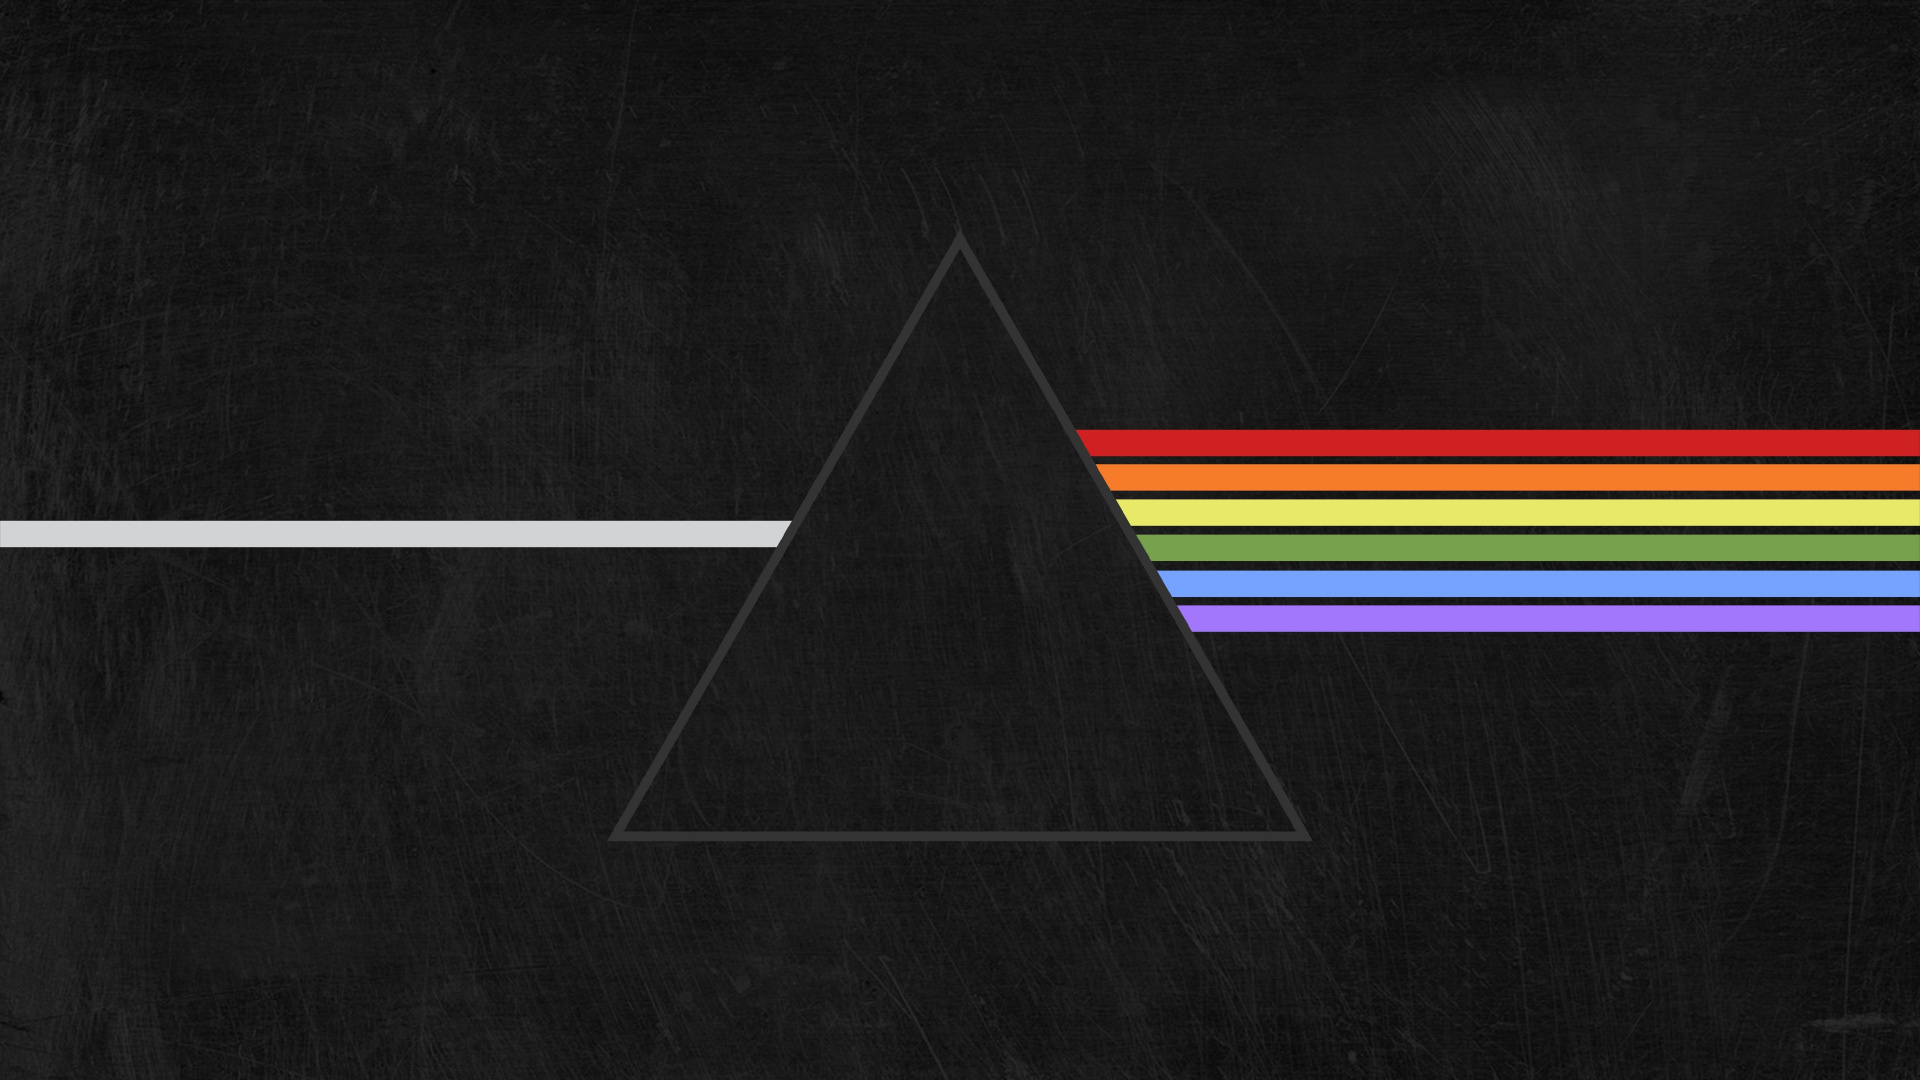 The Dark Side of The Moon, Pink Floyd, Prism, Black, Line. Wallpaper in 1920x1080 Resolution